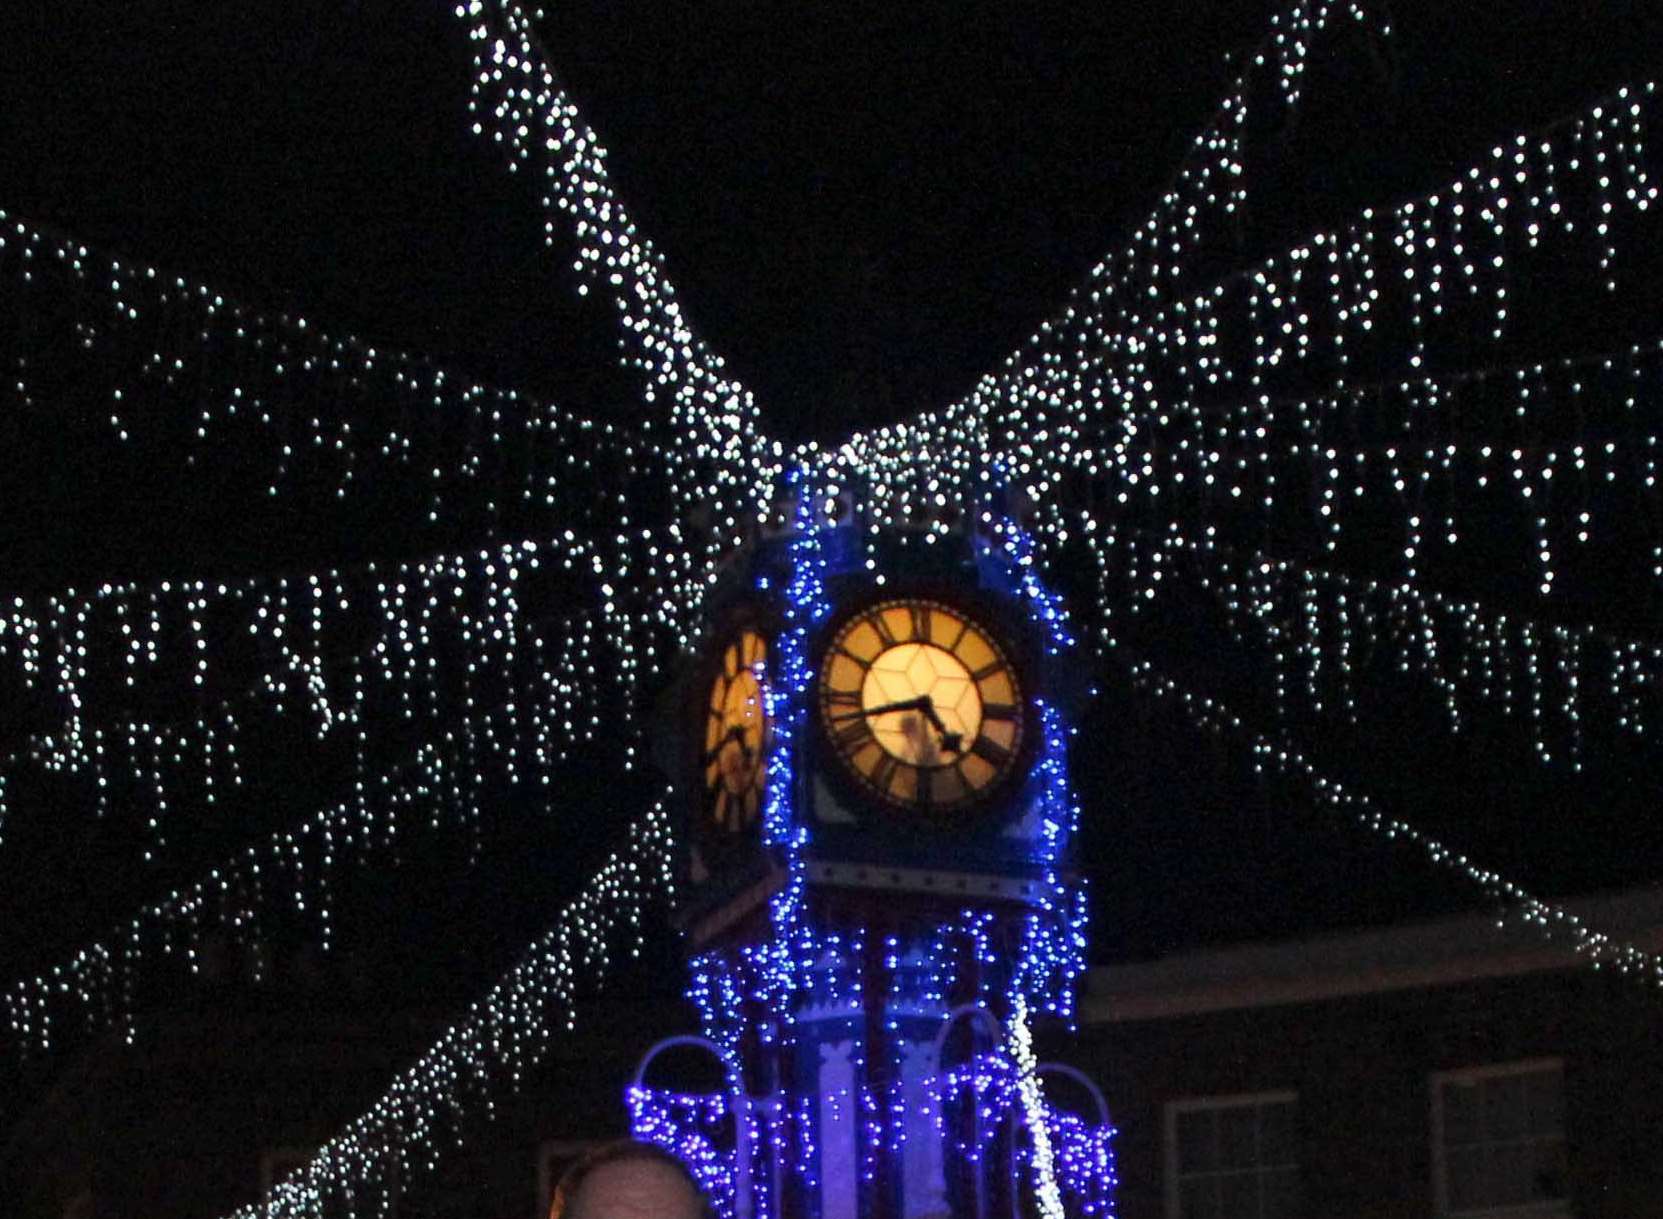 Sheerness clock tower lit up with Christmas lights